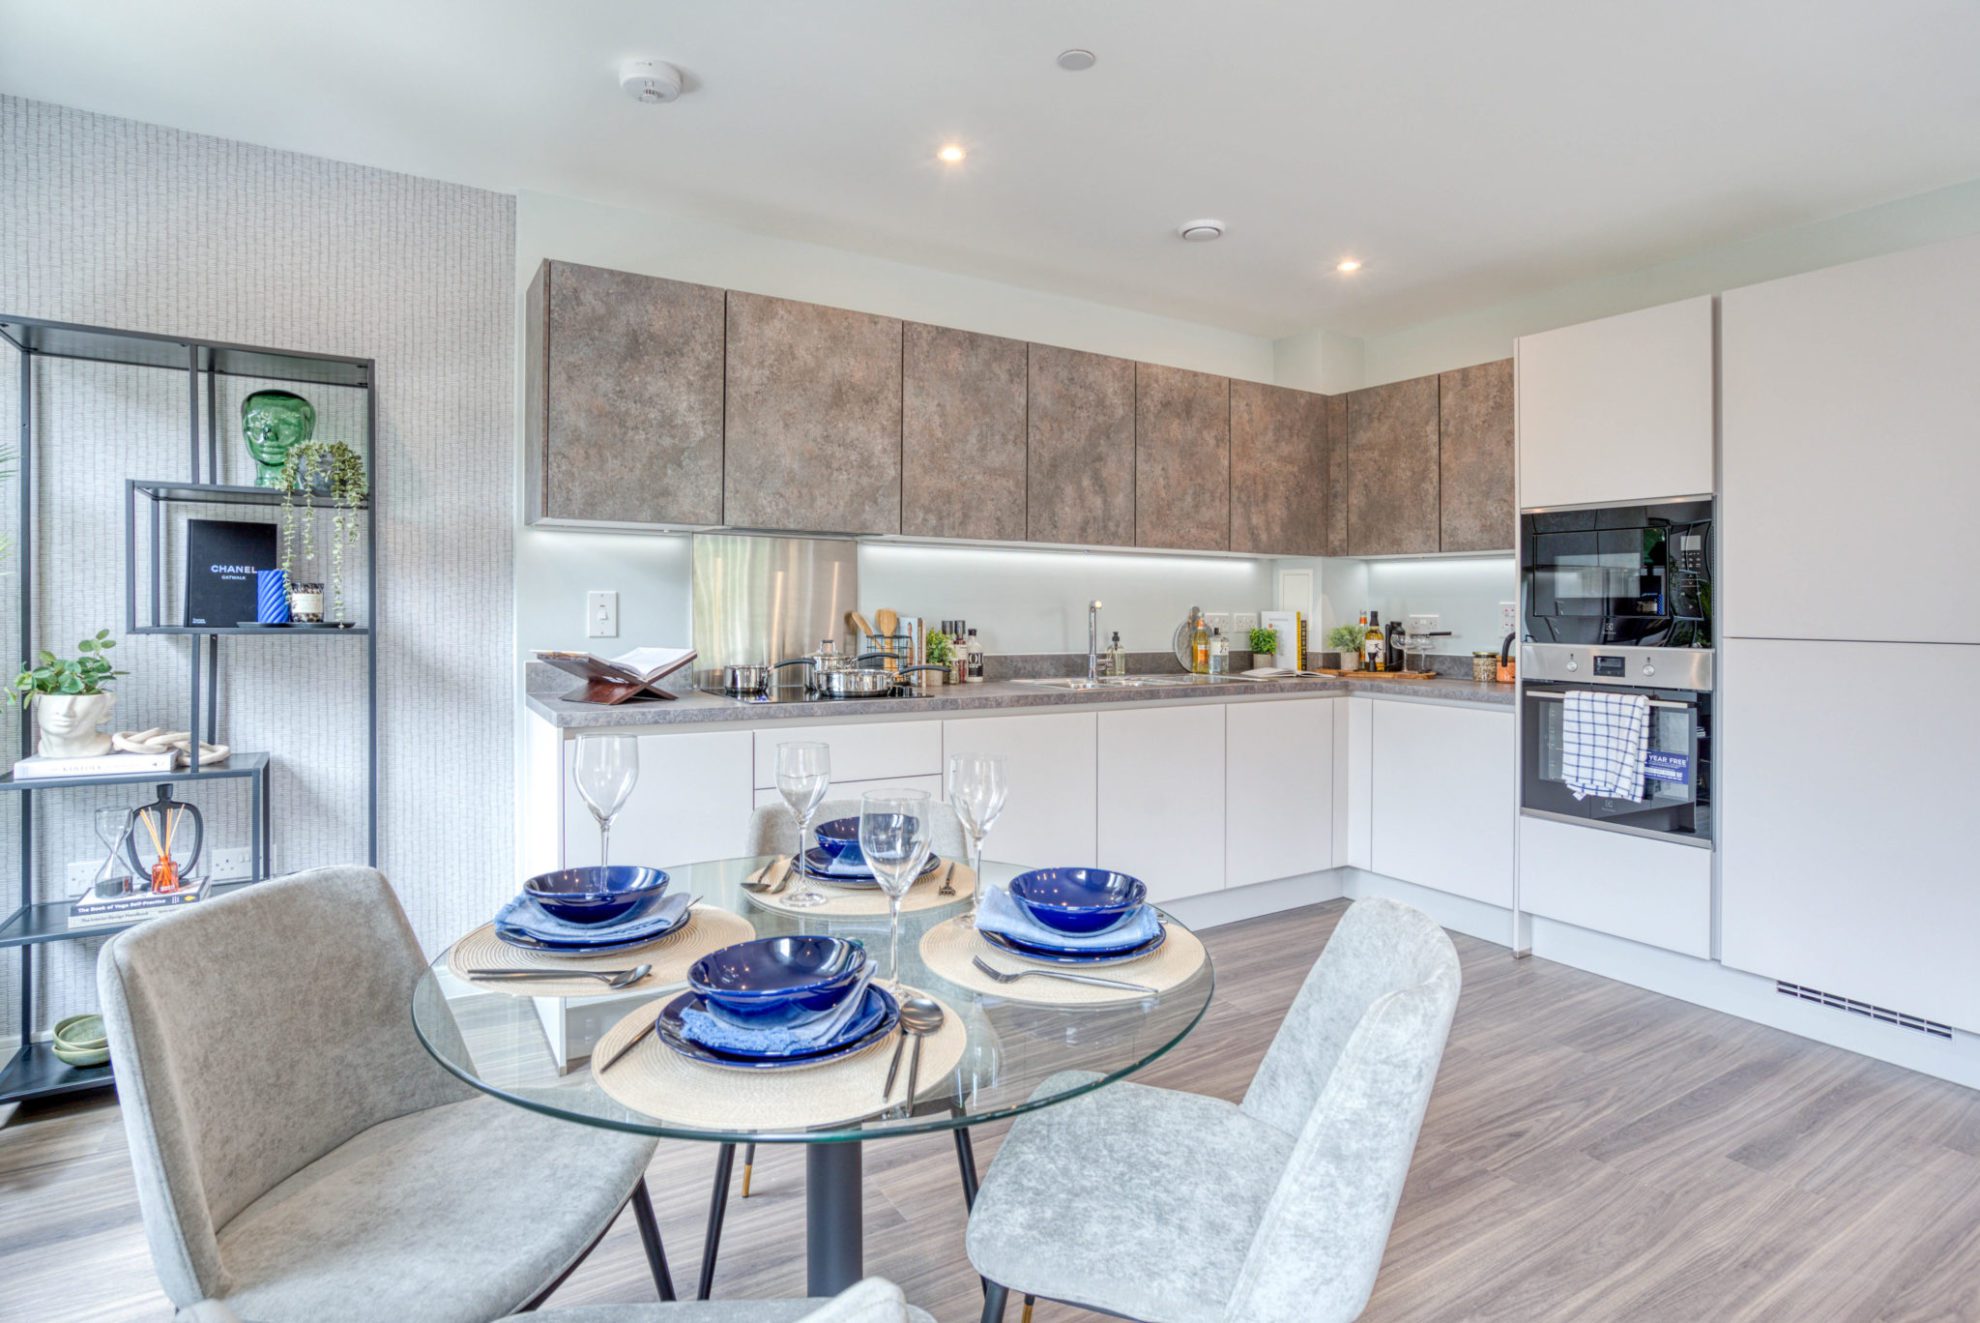 Acton Gardens Show home dining and kitchen area